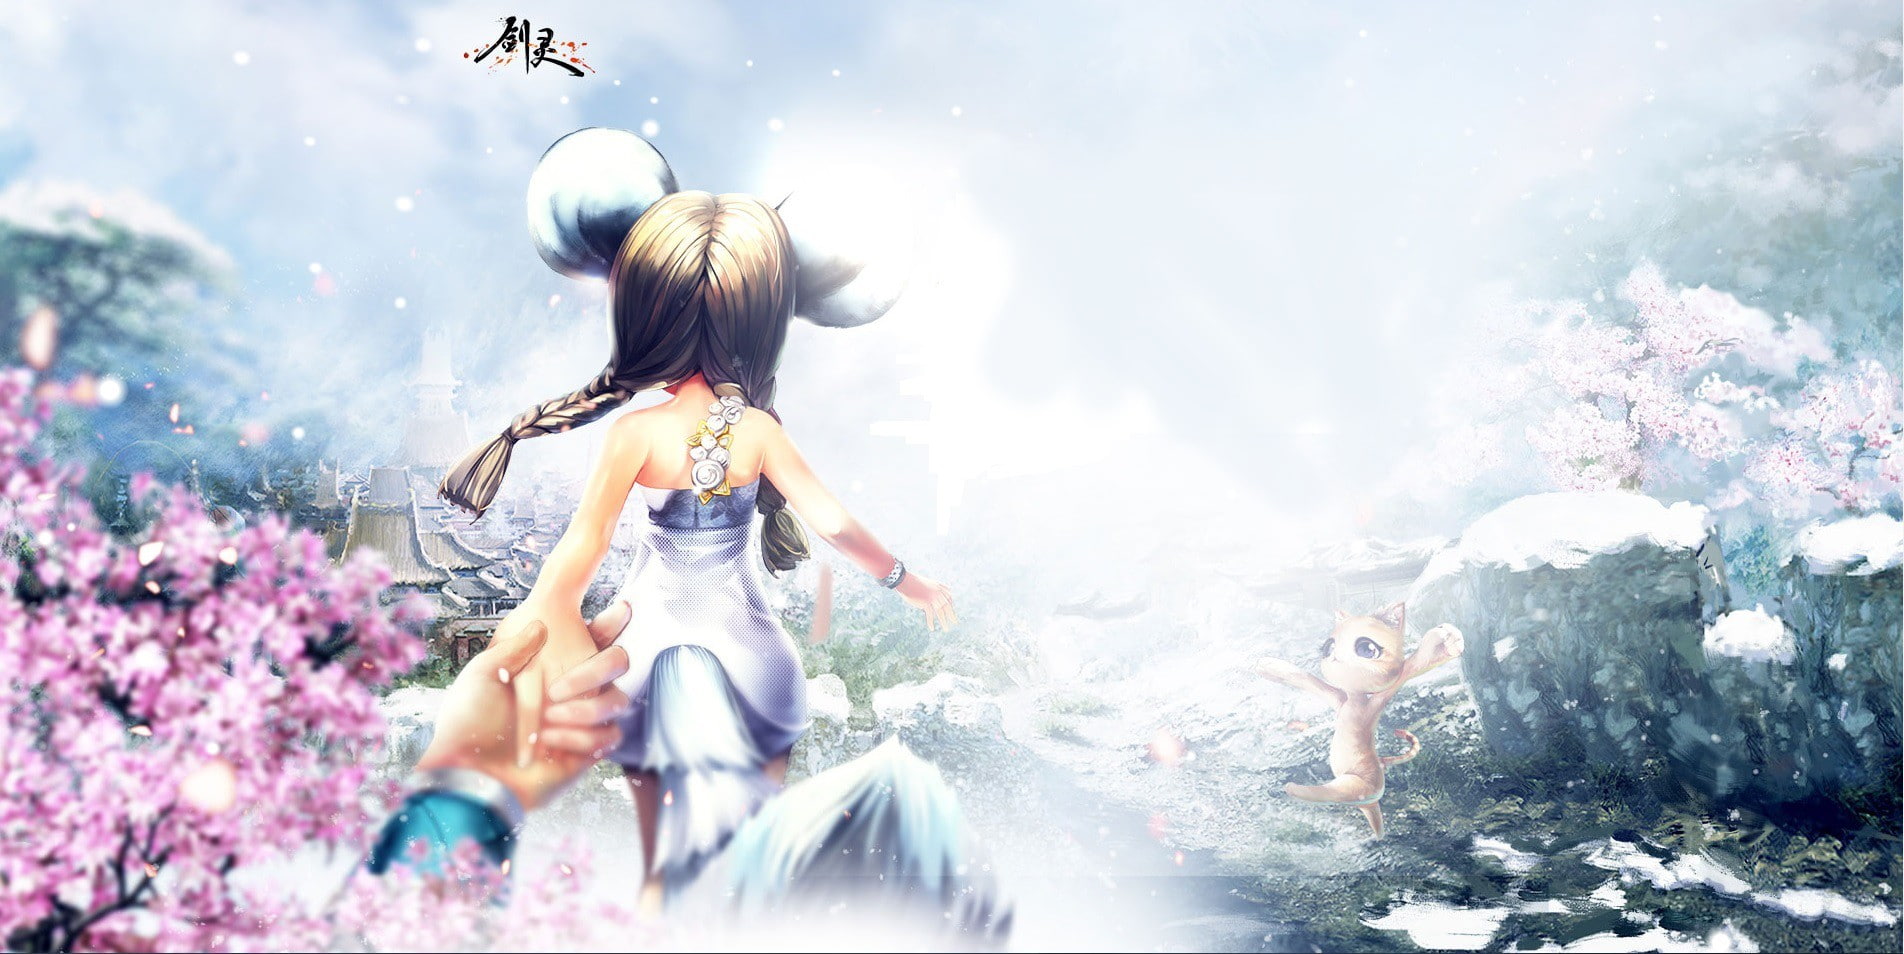 Blade and Soul, PC gaming, motion, women, real people, lifestyles